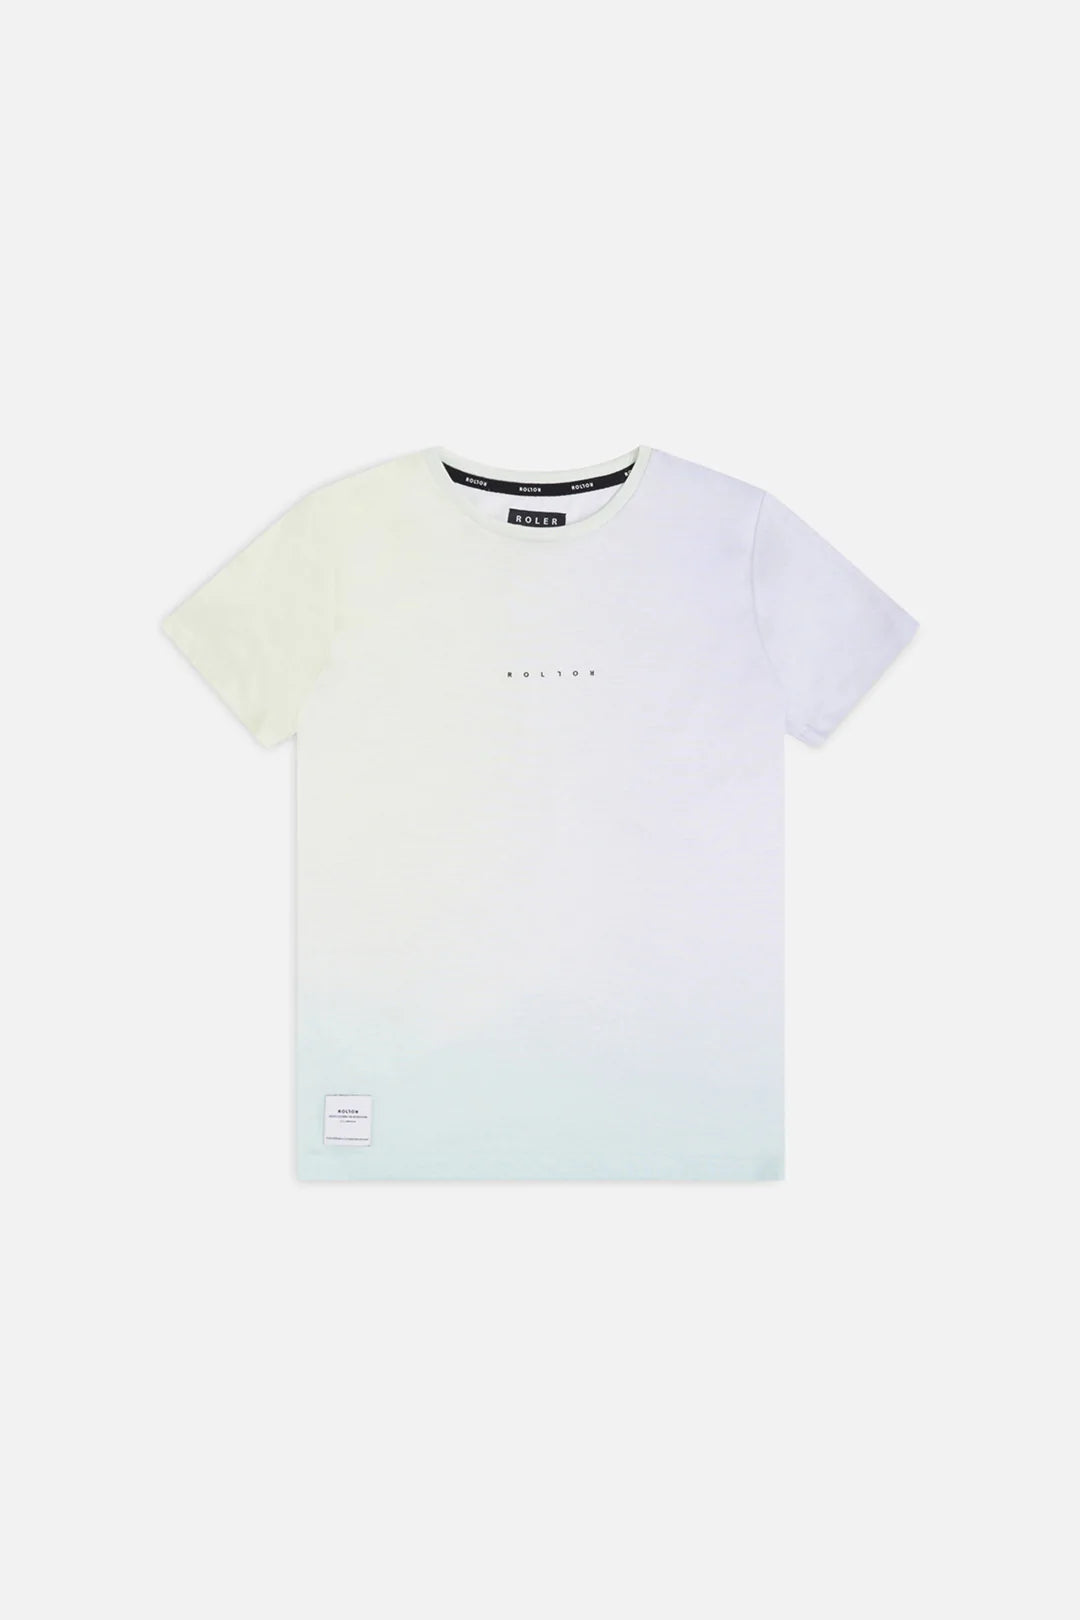 THE ROLER GATESBY TEE - MULTI